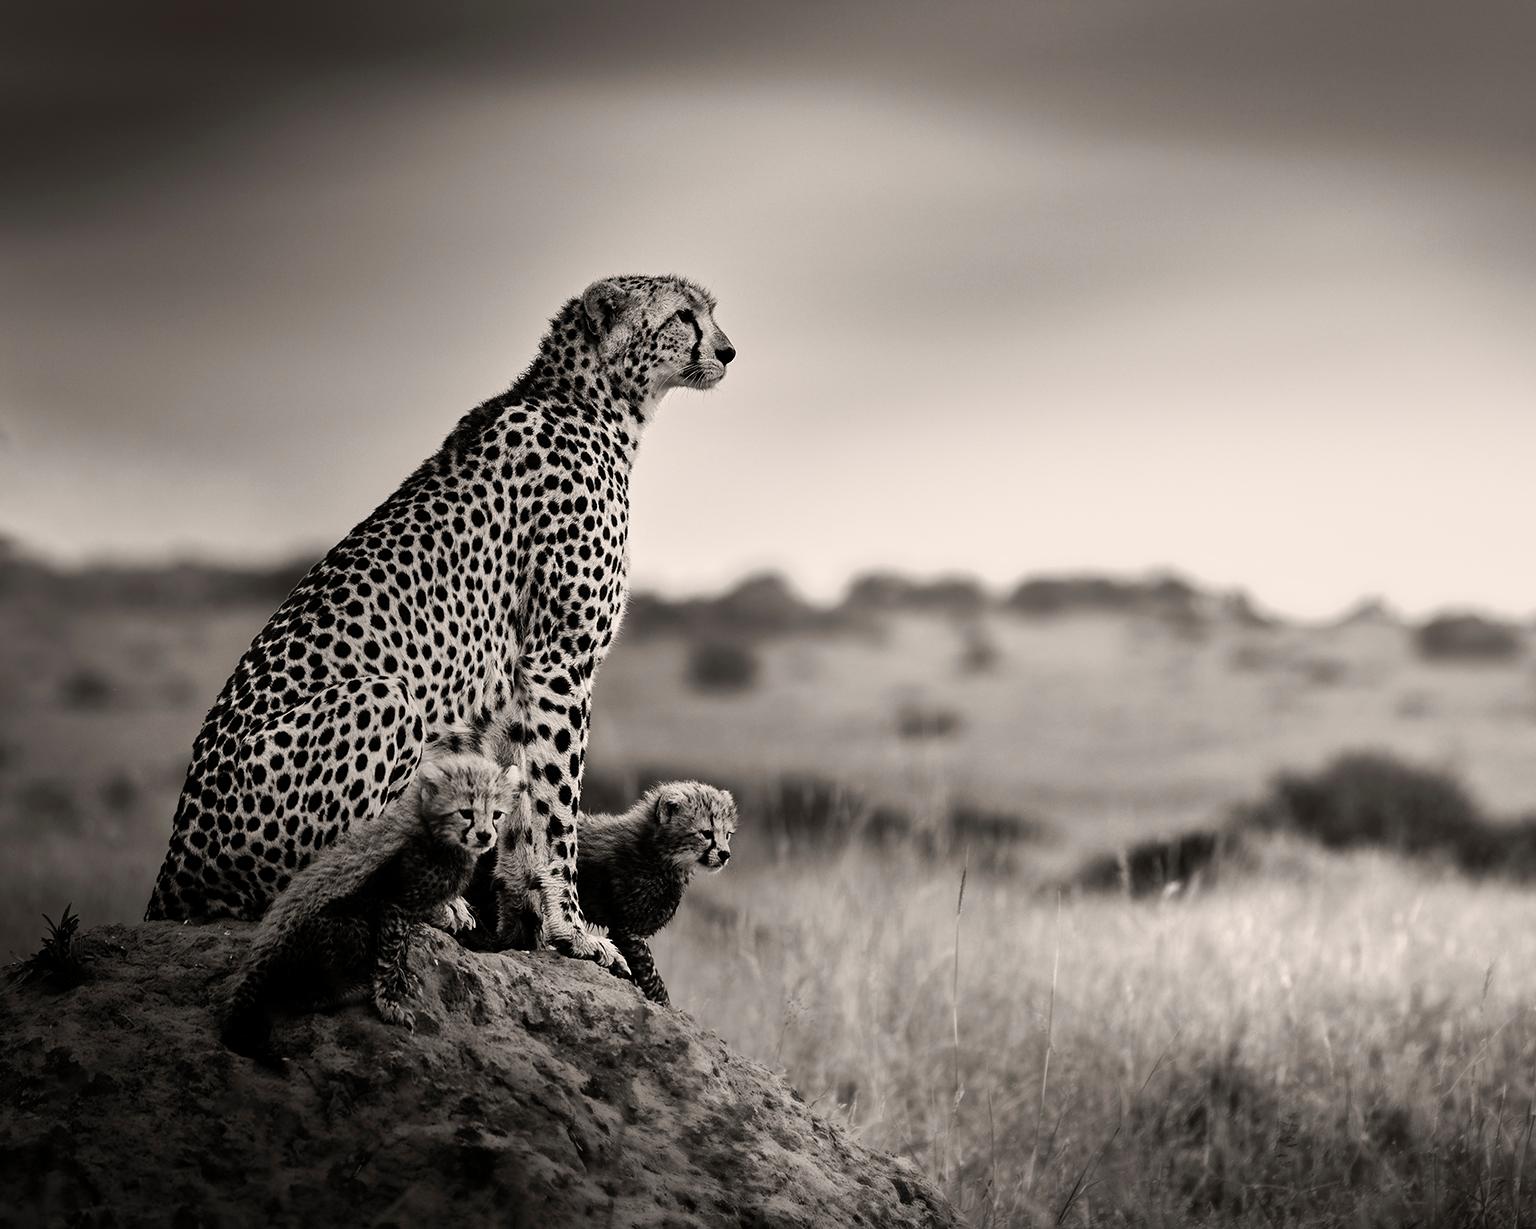 Cheetah with babies, blackandhwite photography, Africa, Portrait, Wildlife